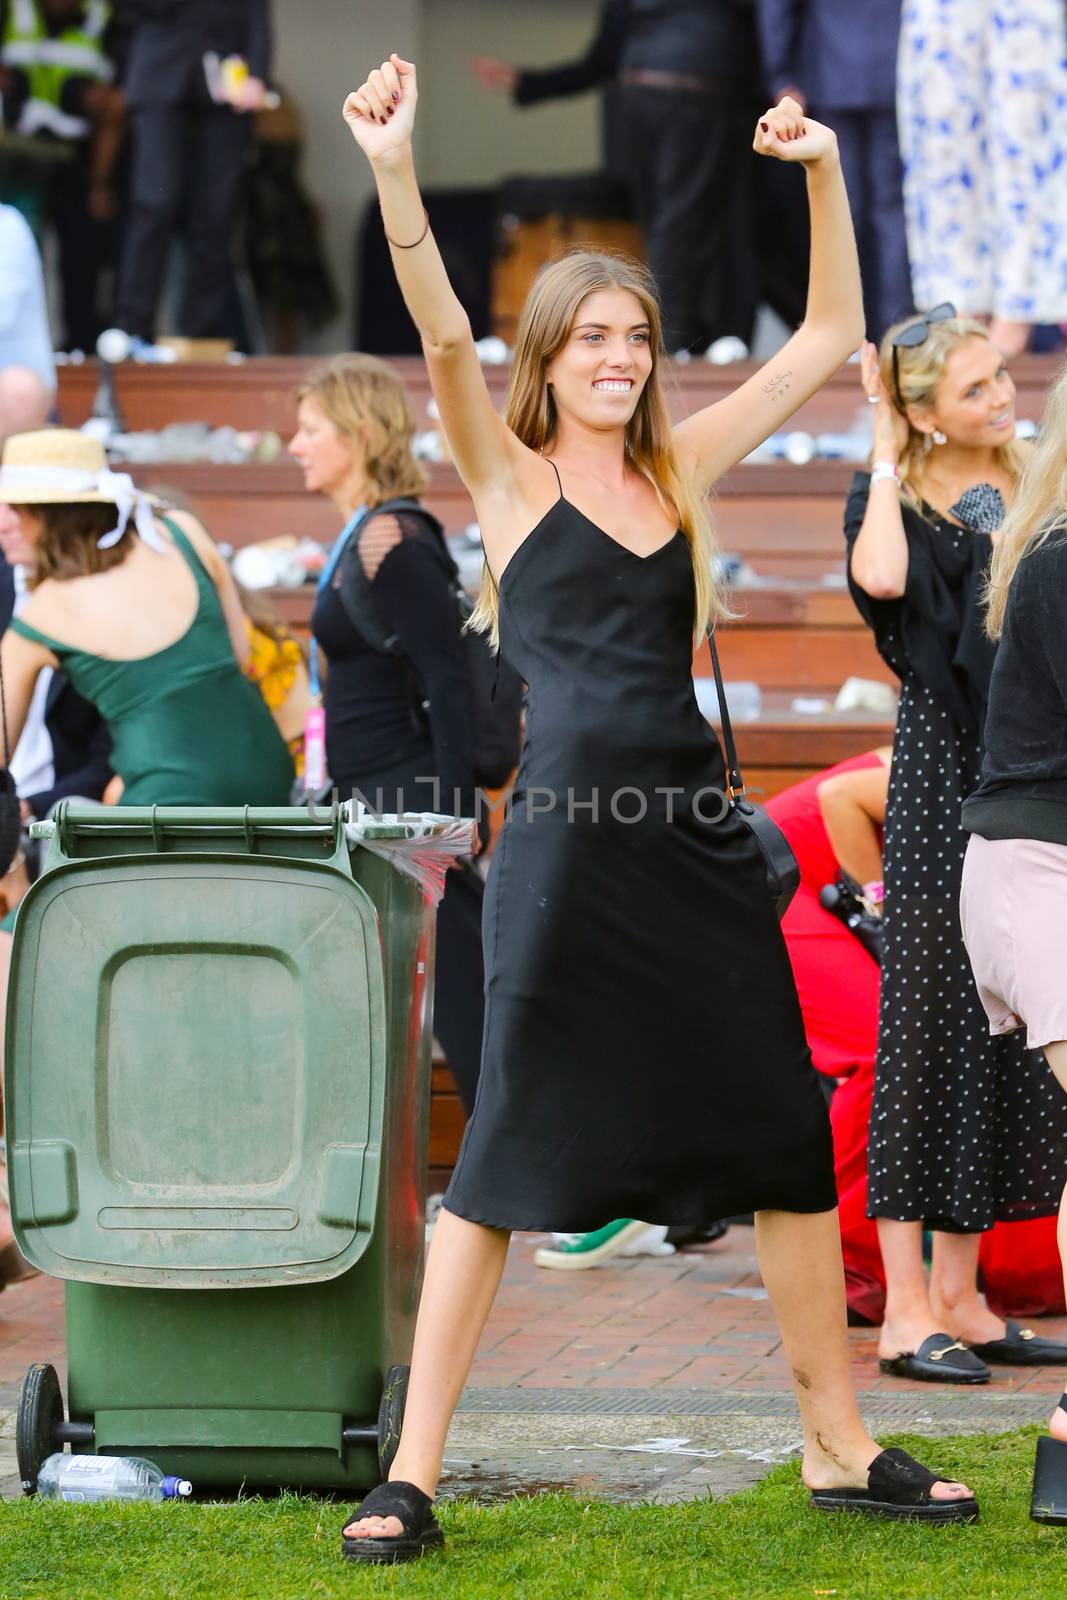 MELBOURNE, AUSTRALIA - NOVEMBER 6: Drunk punters at the end of the day during the Lexus Melbourne Cup Day at the 2018 Melbourne Cup Carnival